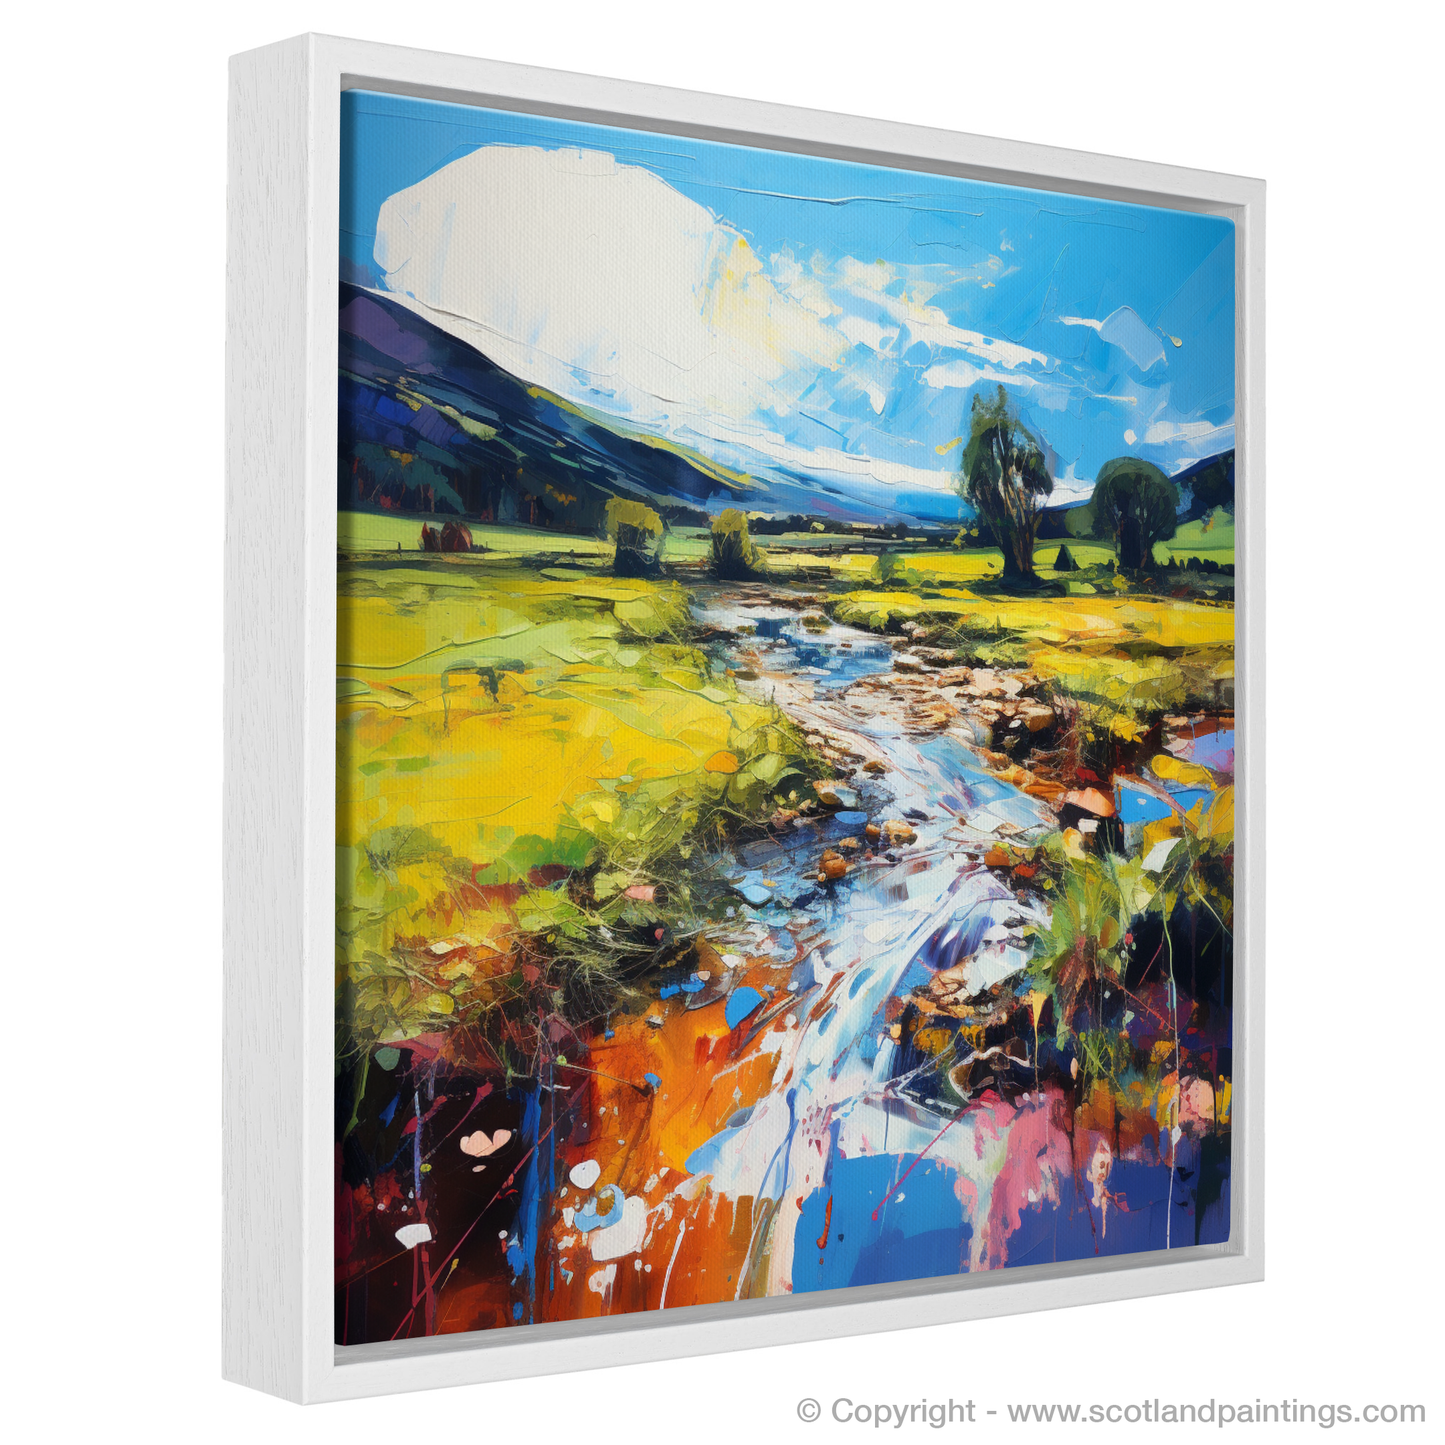 Painting and Art Print of Glen Esk, Angus in summer entitled "A Summer's Dance in Glen Esk, Angus".